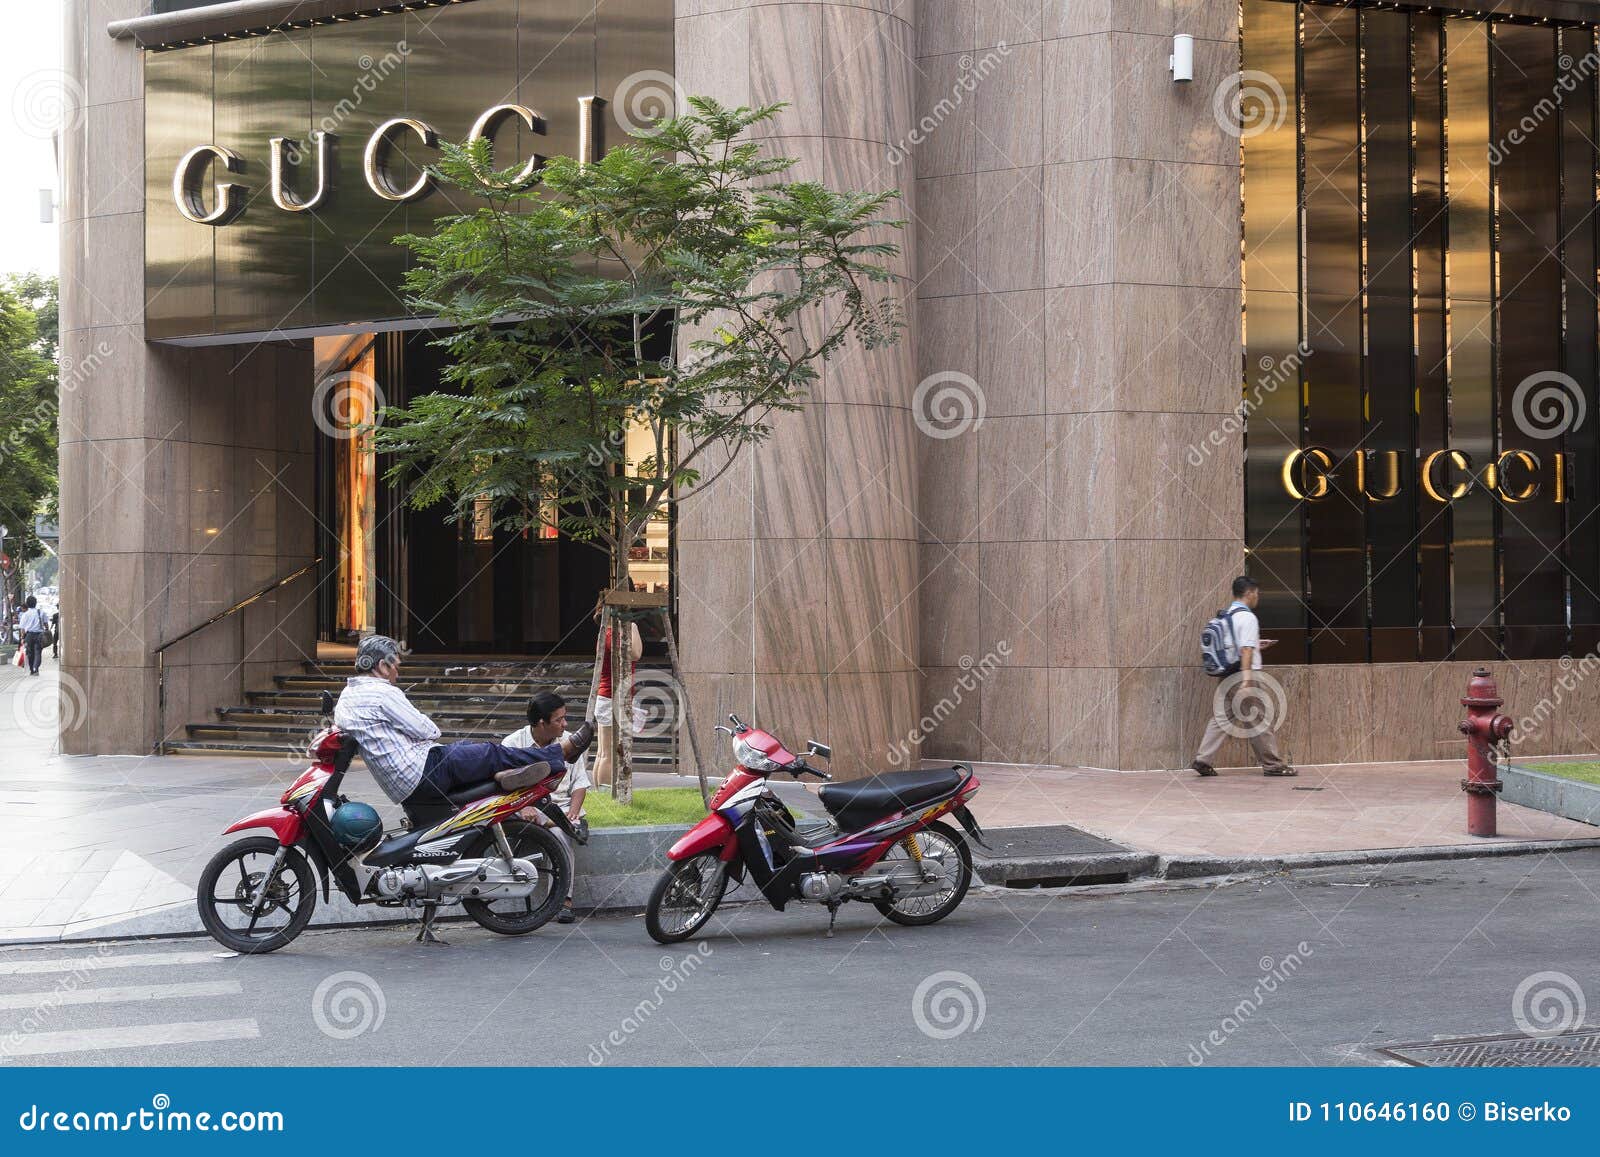 Gucci Store in Downtown Ho Chi Minh City in Vietnam Editorial Image - Image  of asia, reform: 110646160